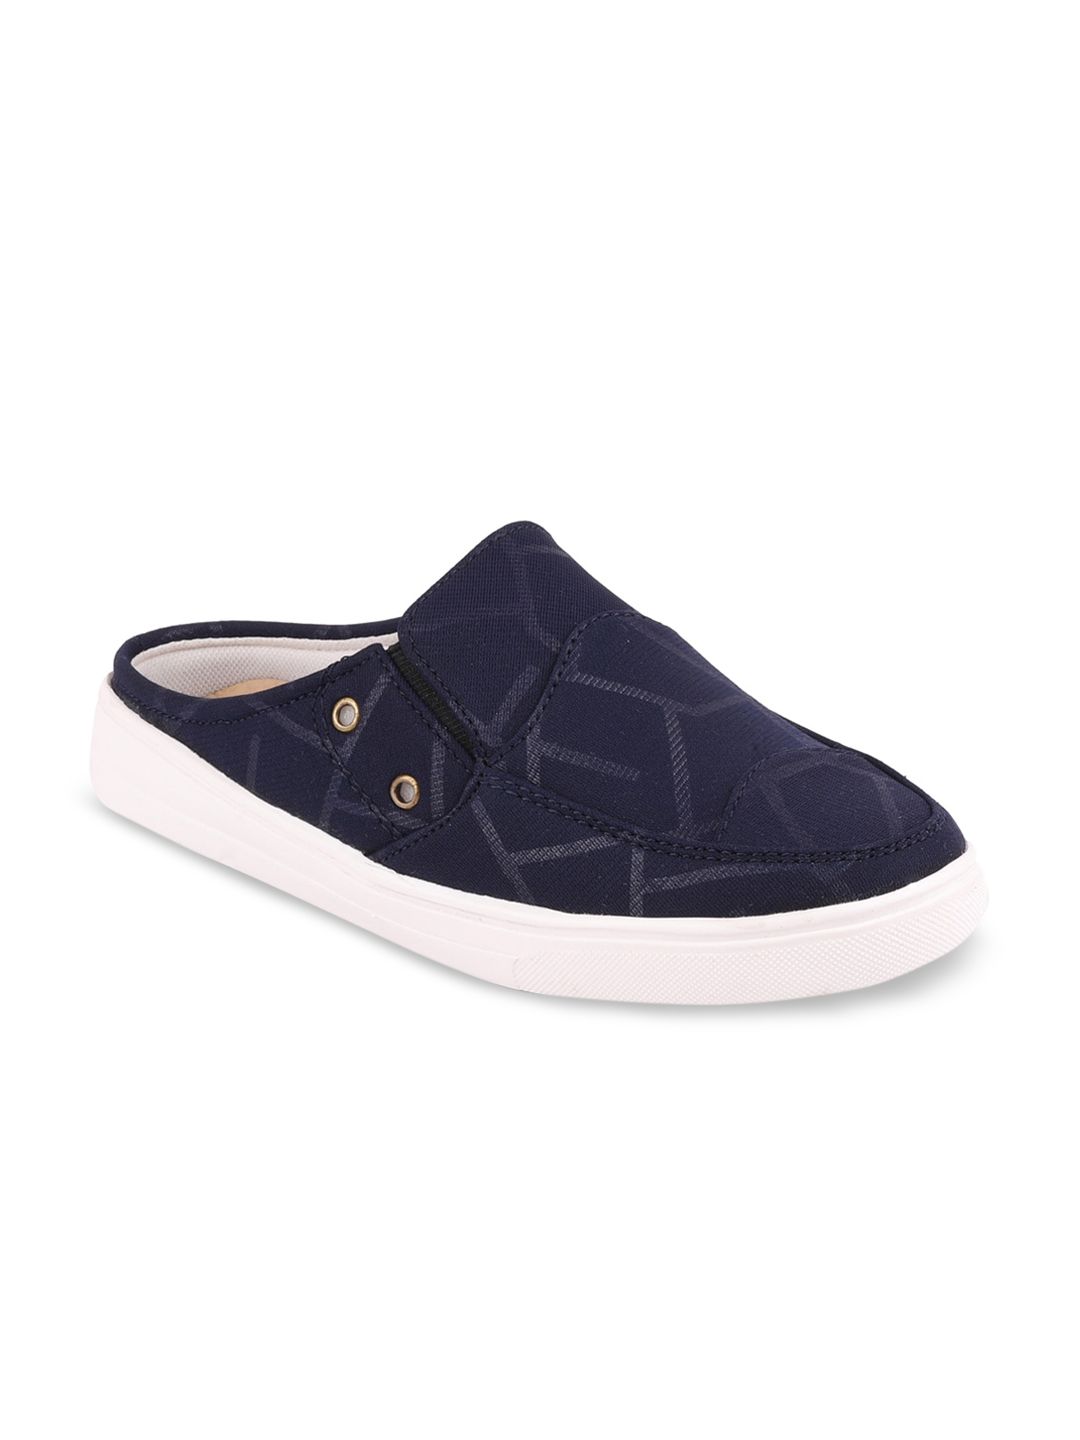 FAUSTO Women Navy Blue Printed Slip-On Sneakers Price in India